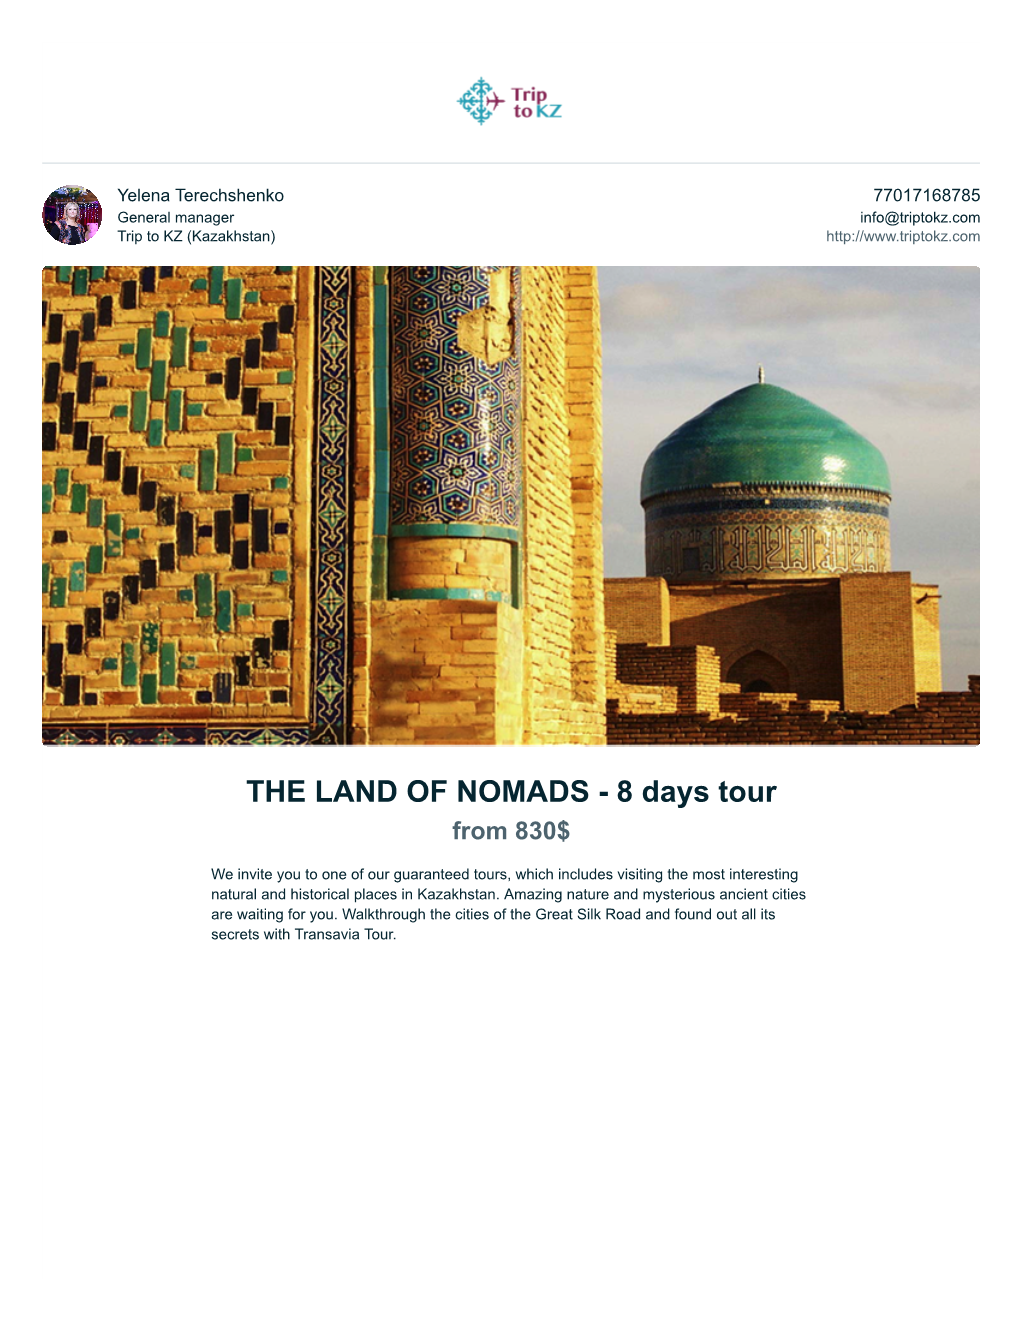 THE LAND of NOMADS - 8 Days Tour from 830$